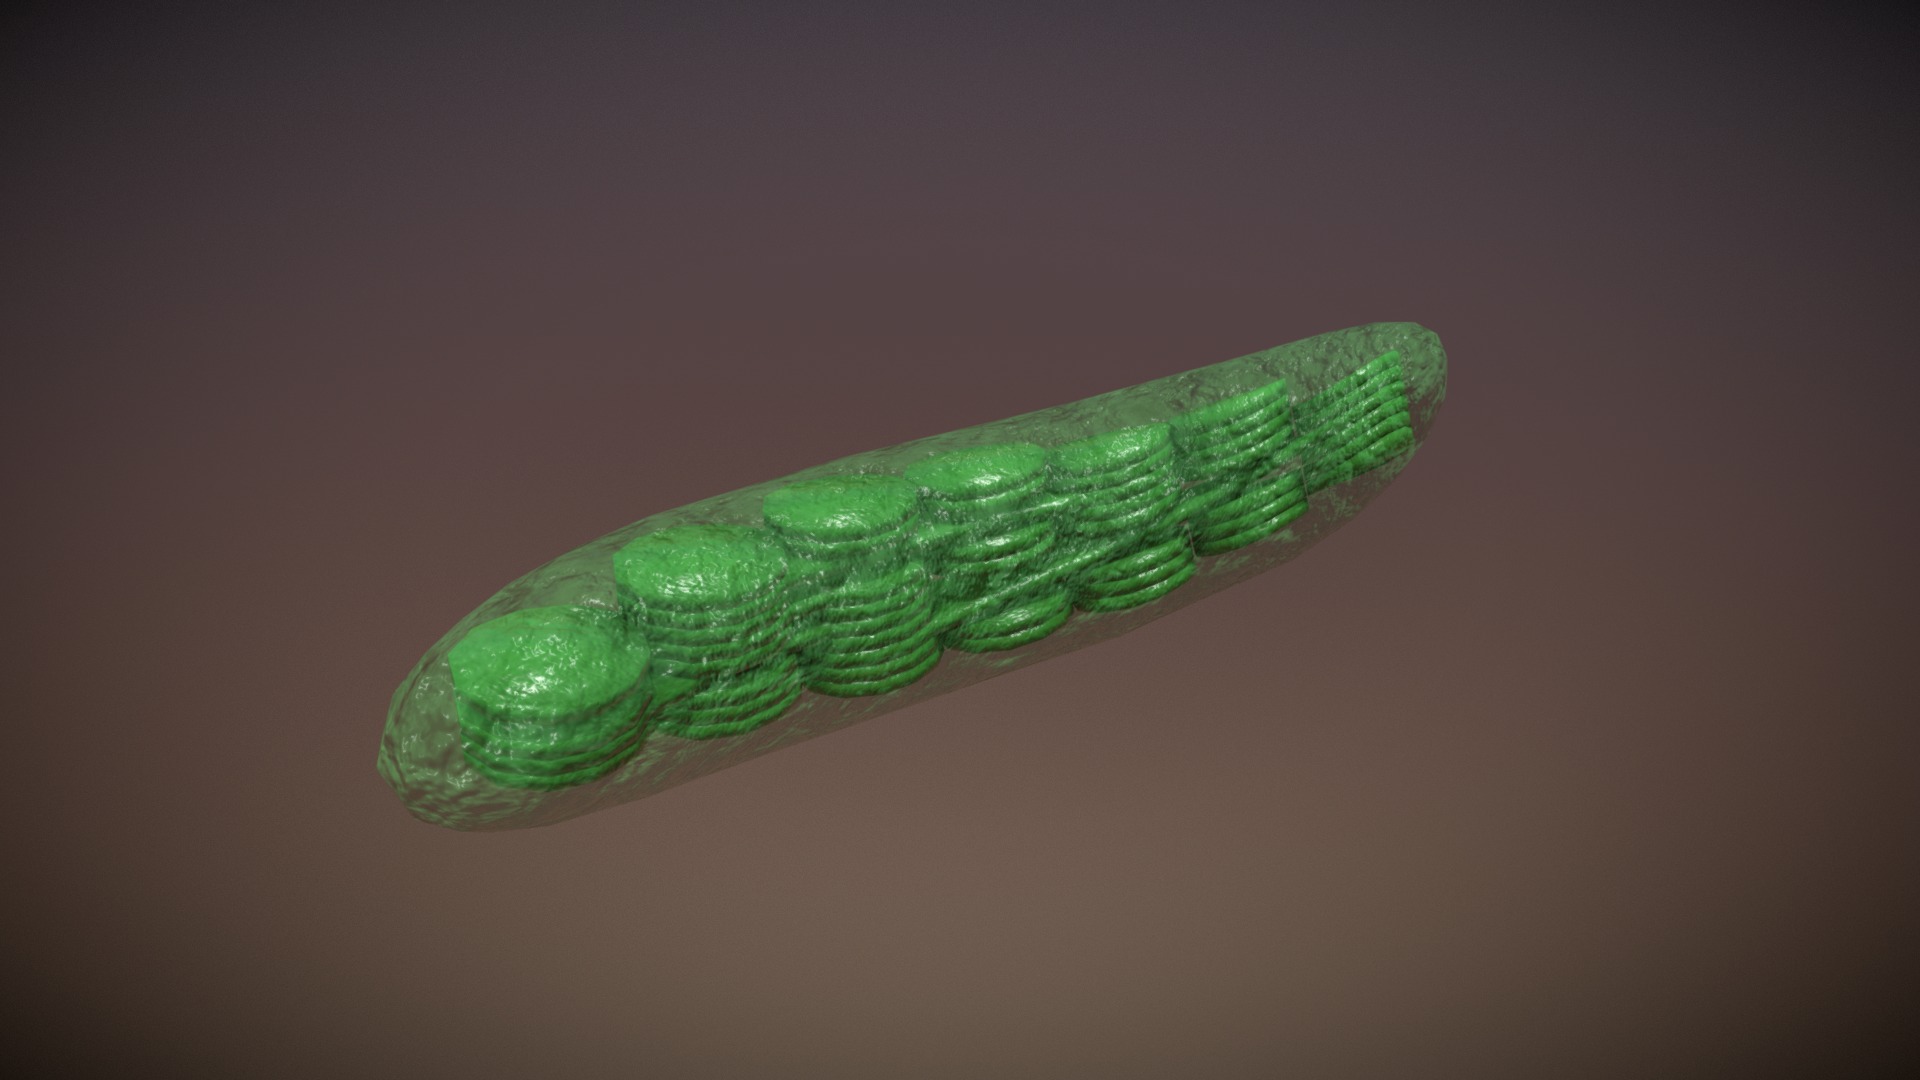 3D model Chloroplast - This is a 3D model of the Chloroplast. The 3D model is about a green caterpillar on a brown surface.